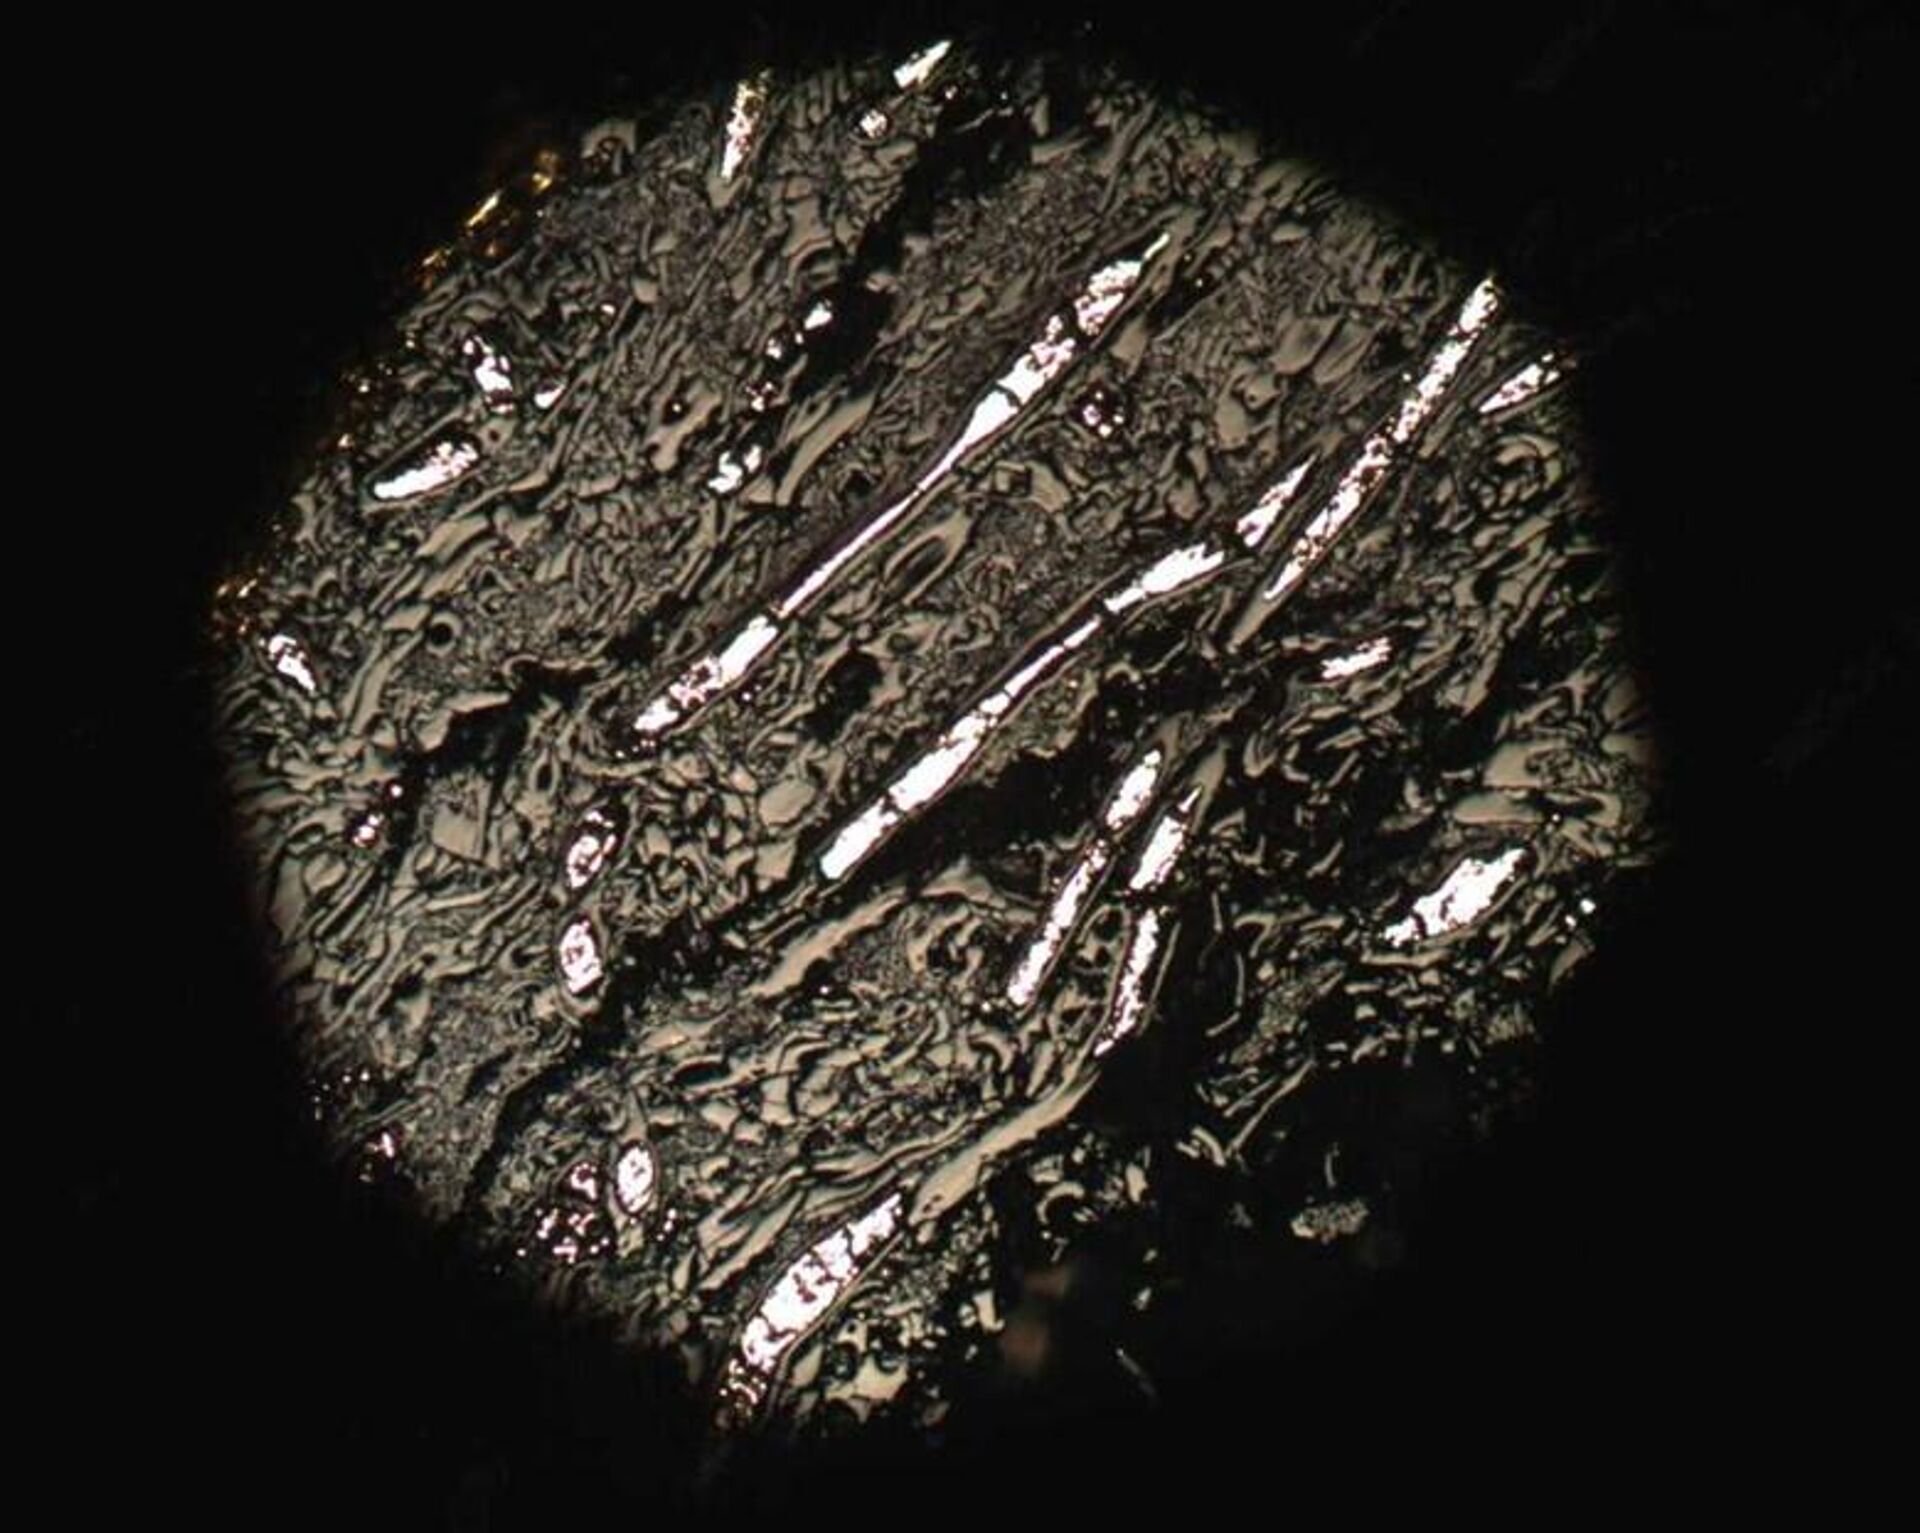 Reflected light microscope image of a 430-million-year-old charred Prototaxites from a borehole drilled in Wales. The high-reflecting (white) material infilling the larger tubes is pyrite, a mineral commonly found in association with charcoal. - Sputnik International, 1920, 20.06.2022